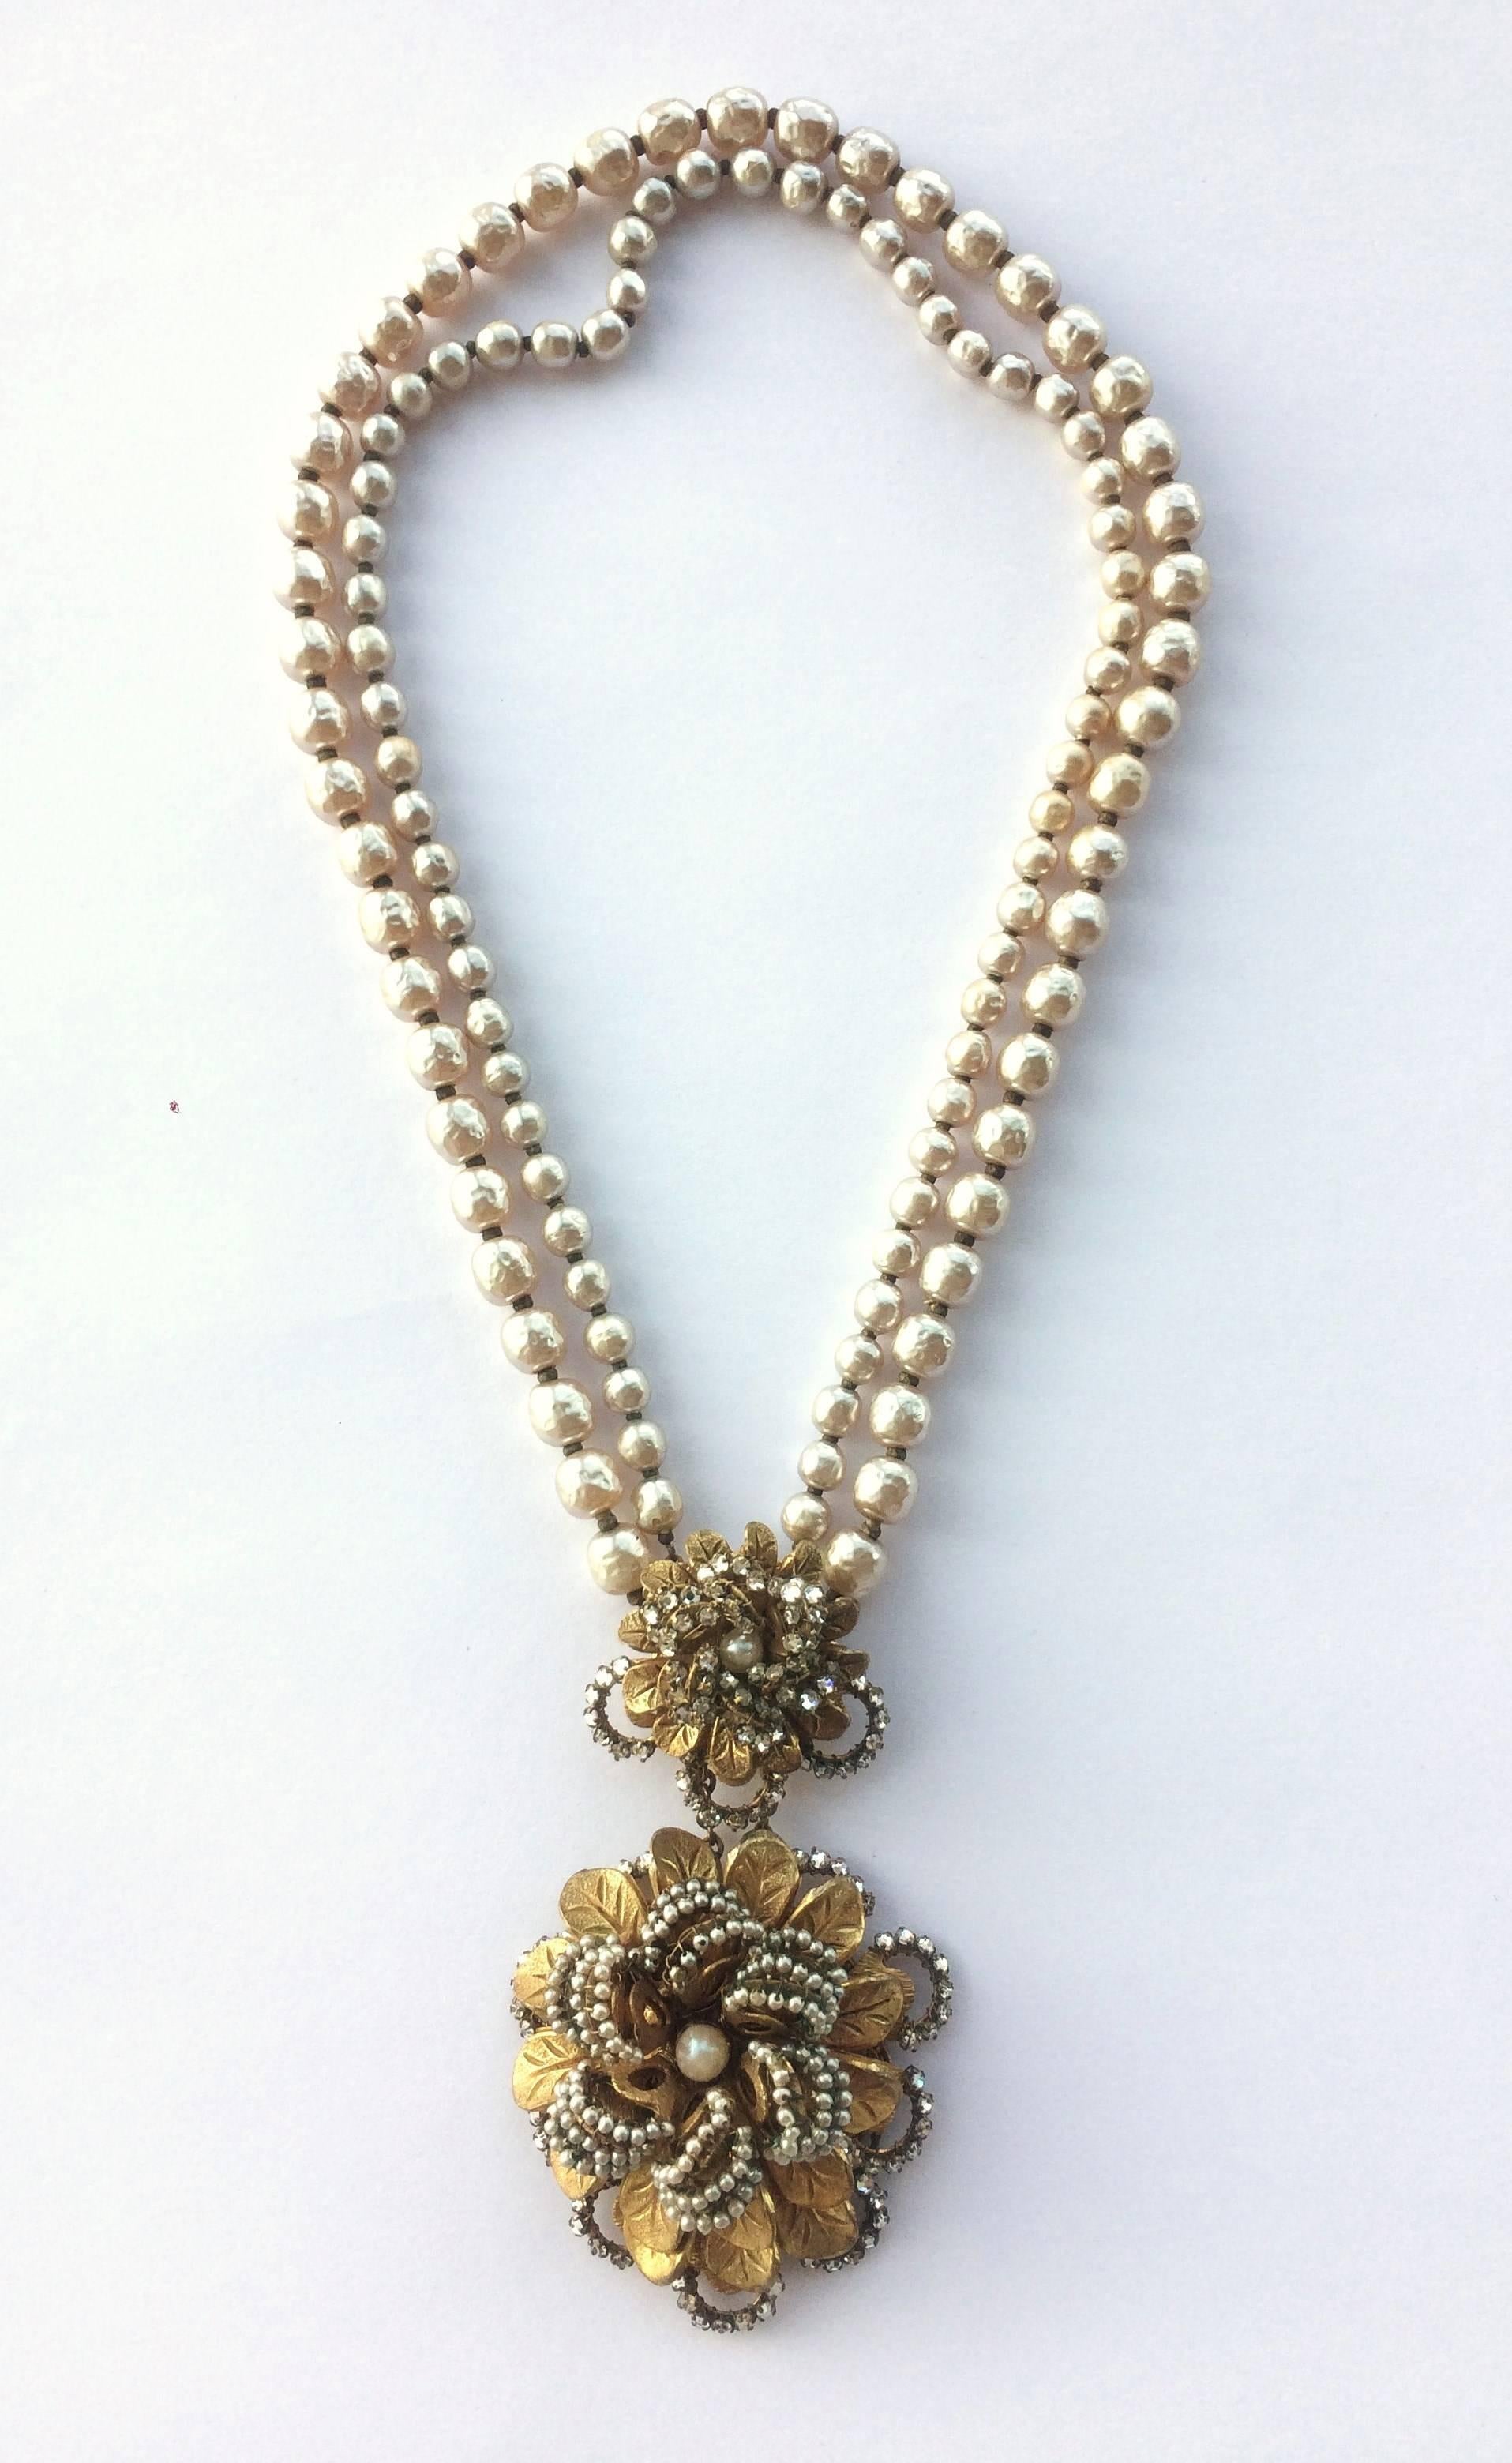 Designed by Frank Hess for Miriam Haskell, this 2 row baroque pearl necklace has a double rosette centrepiece at the front, encrusted with seed pearls and rose montes pastes, with gilded leaf detail. A lovely length, and beautiful example of early